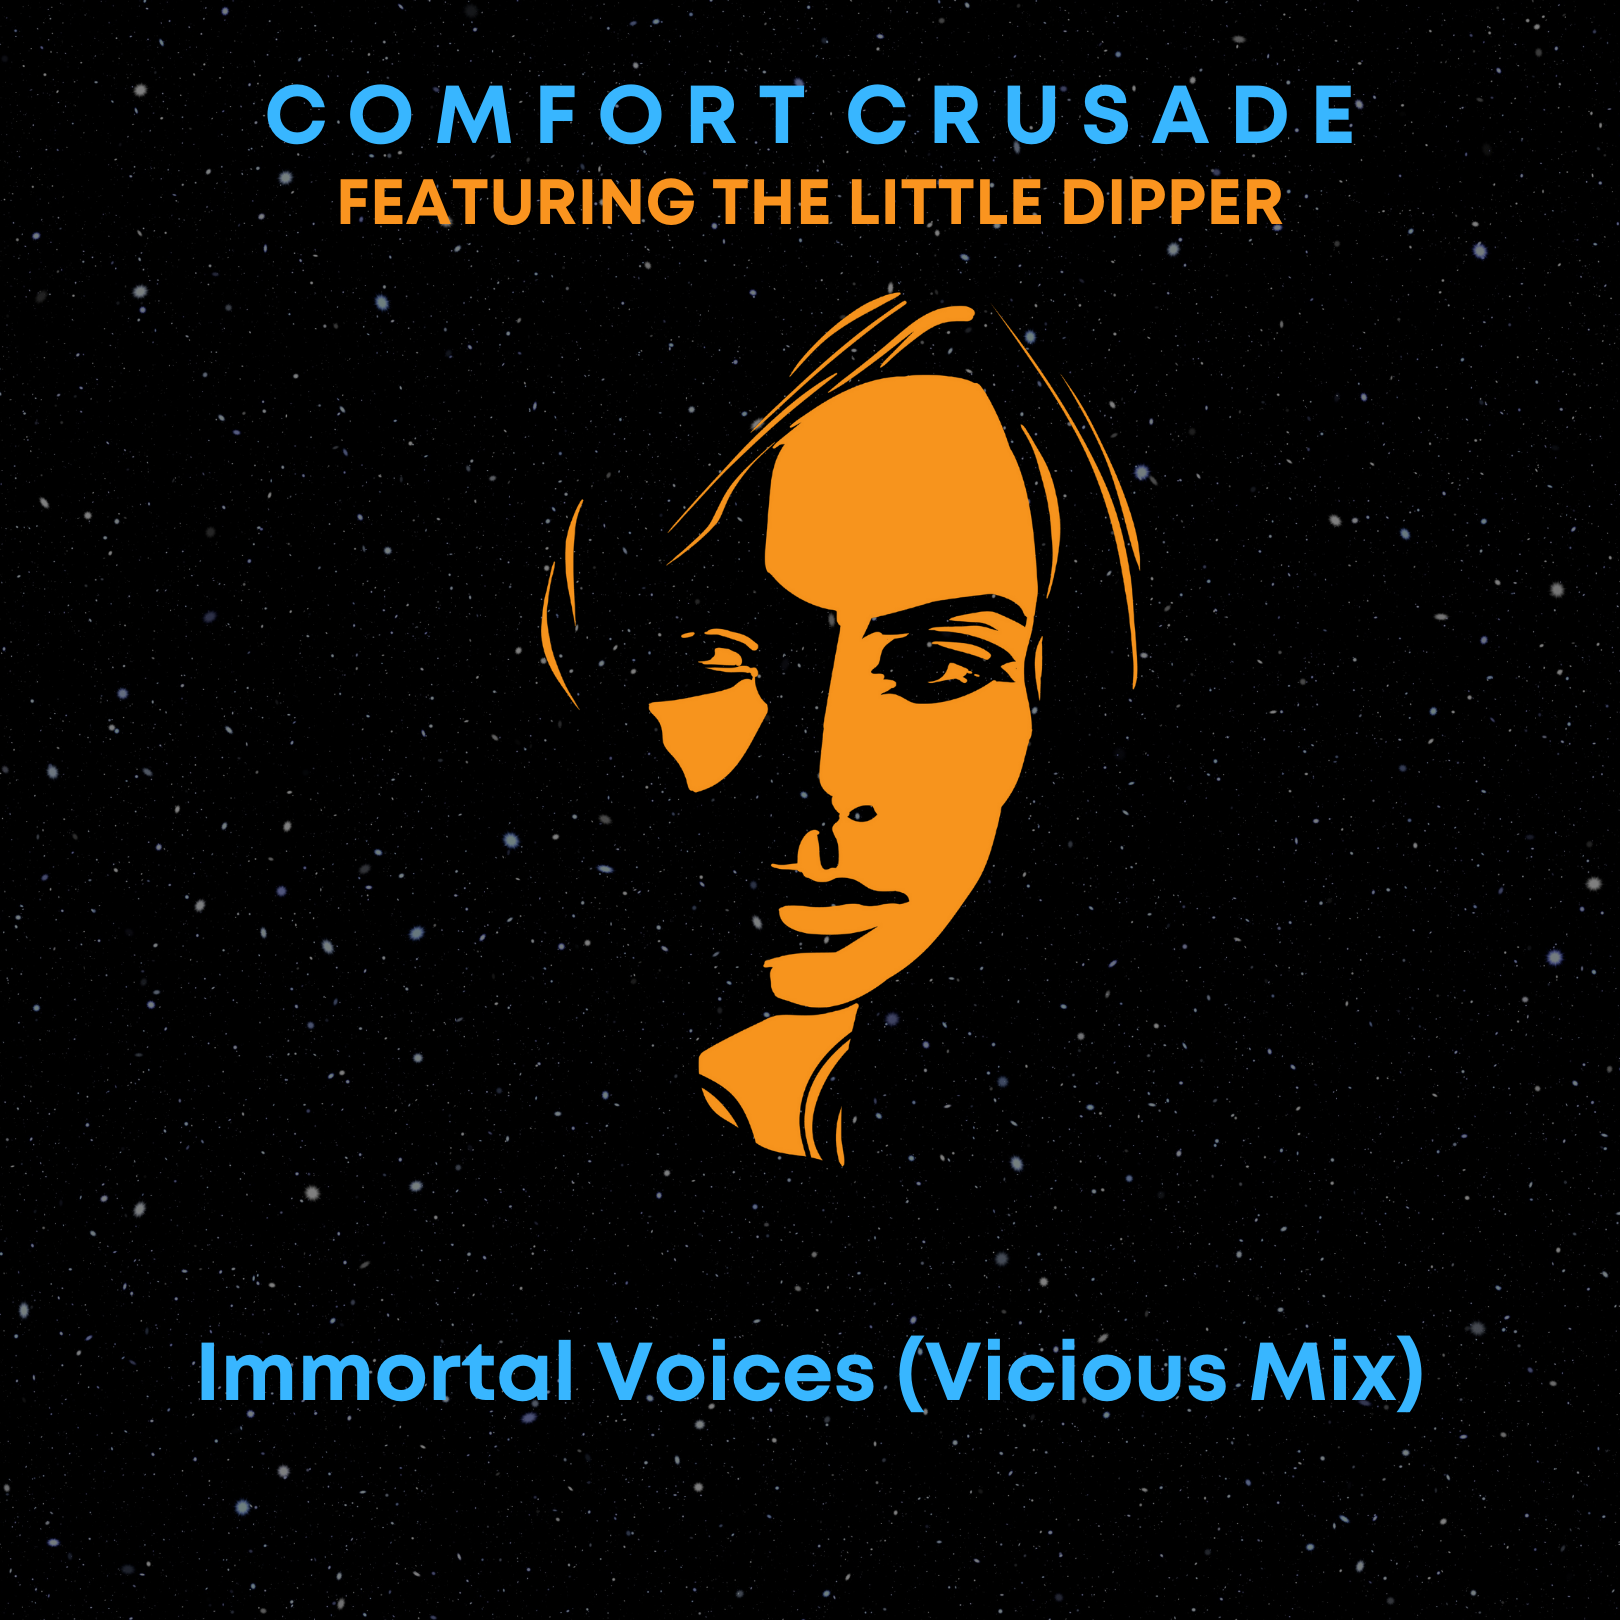 Immortal Voices - Vicious Mix by Comfort Crusade